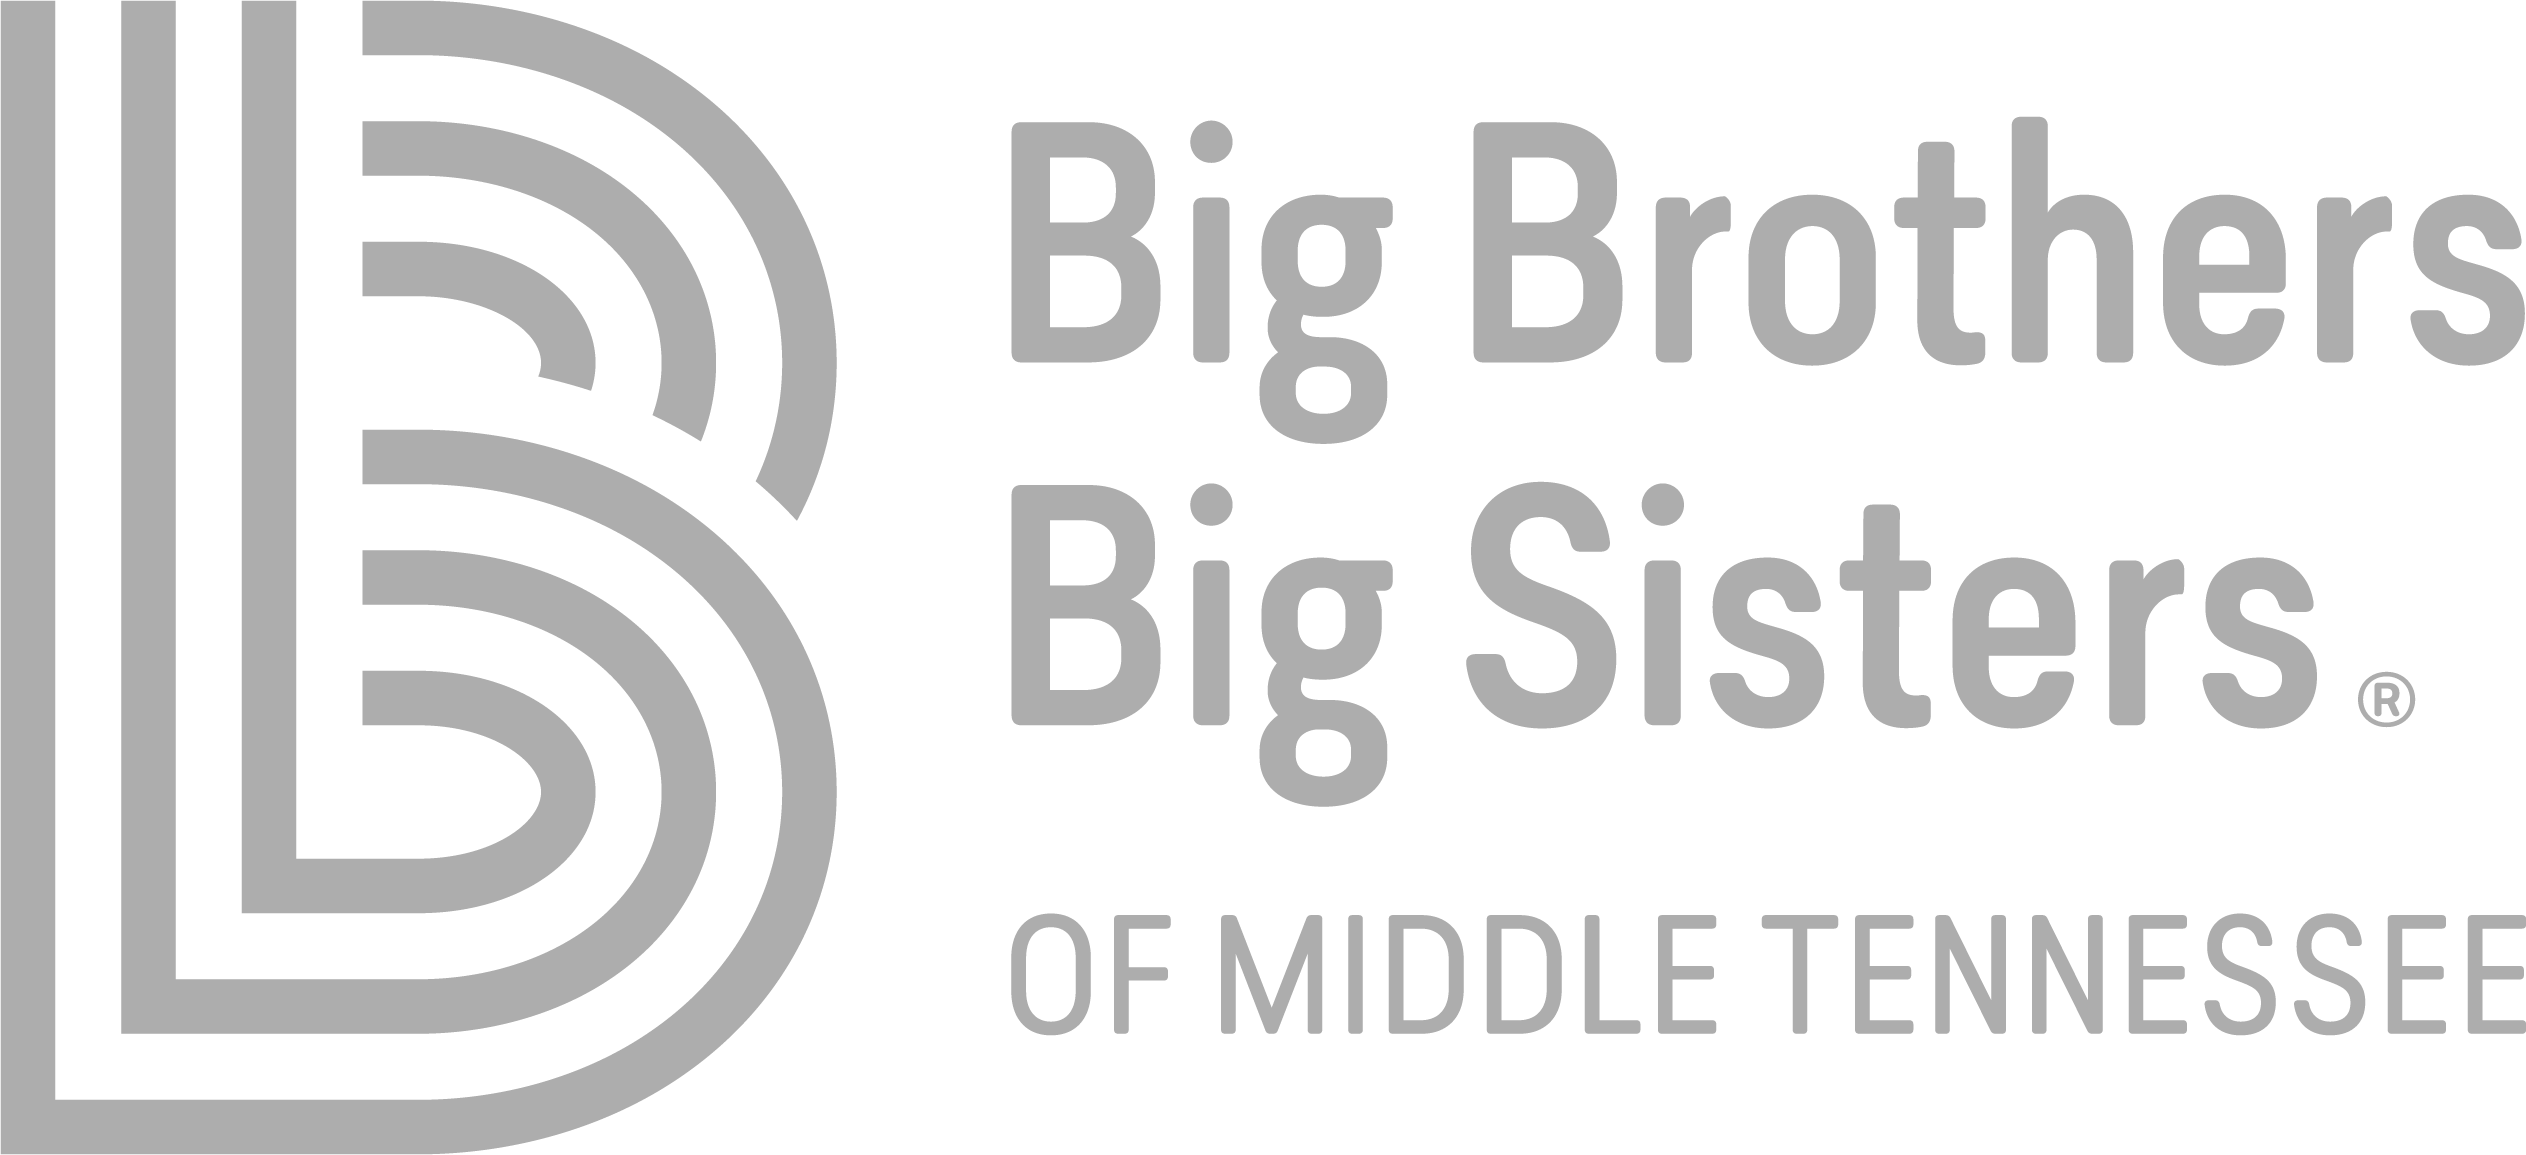 Big Brothers Big Sisters of Middle Tennessee BBBSMT Logo